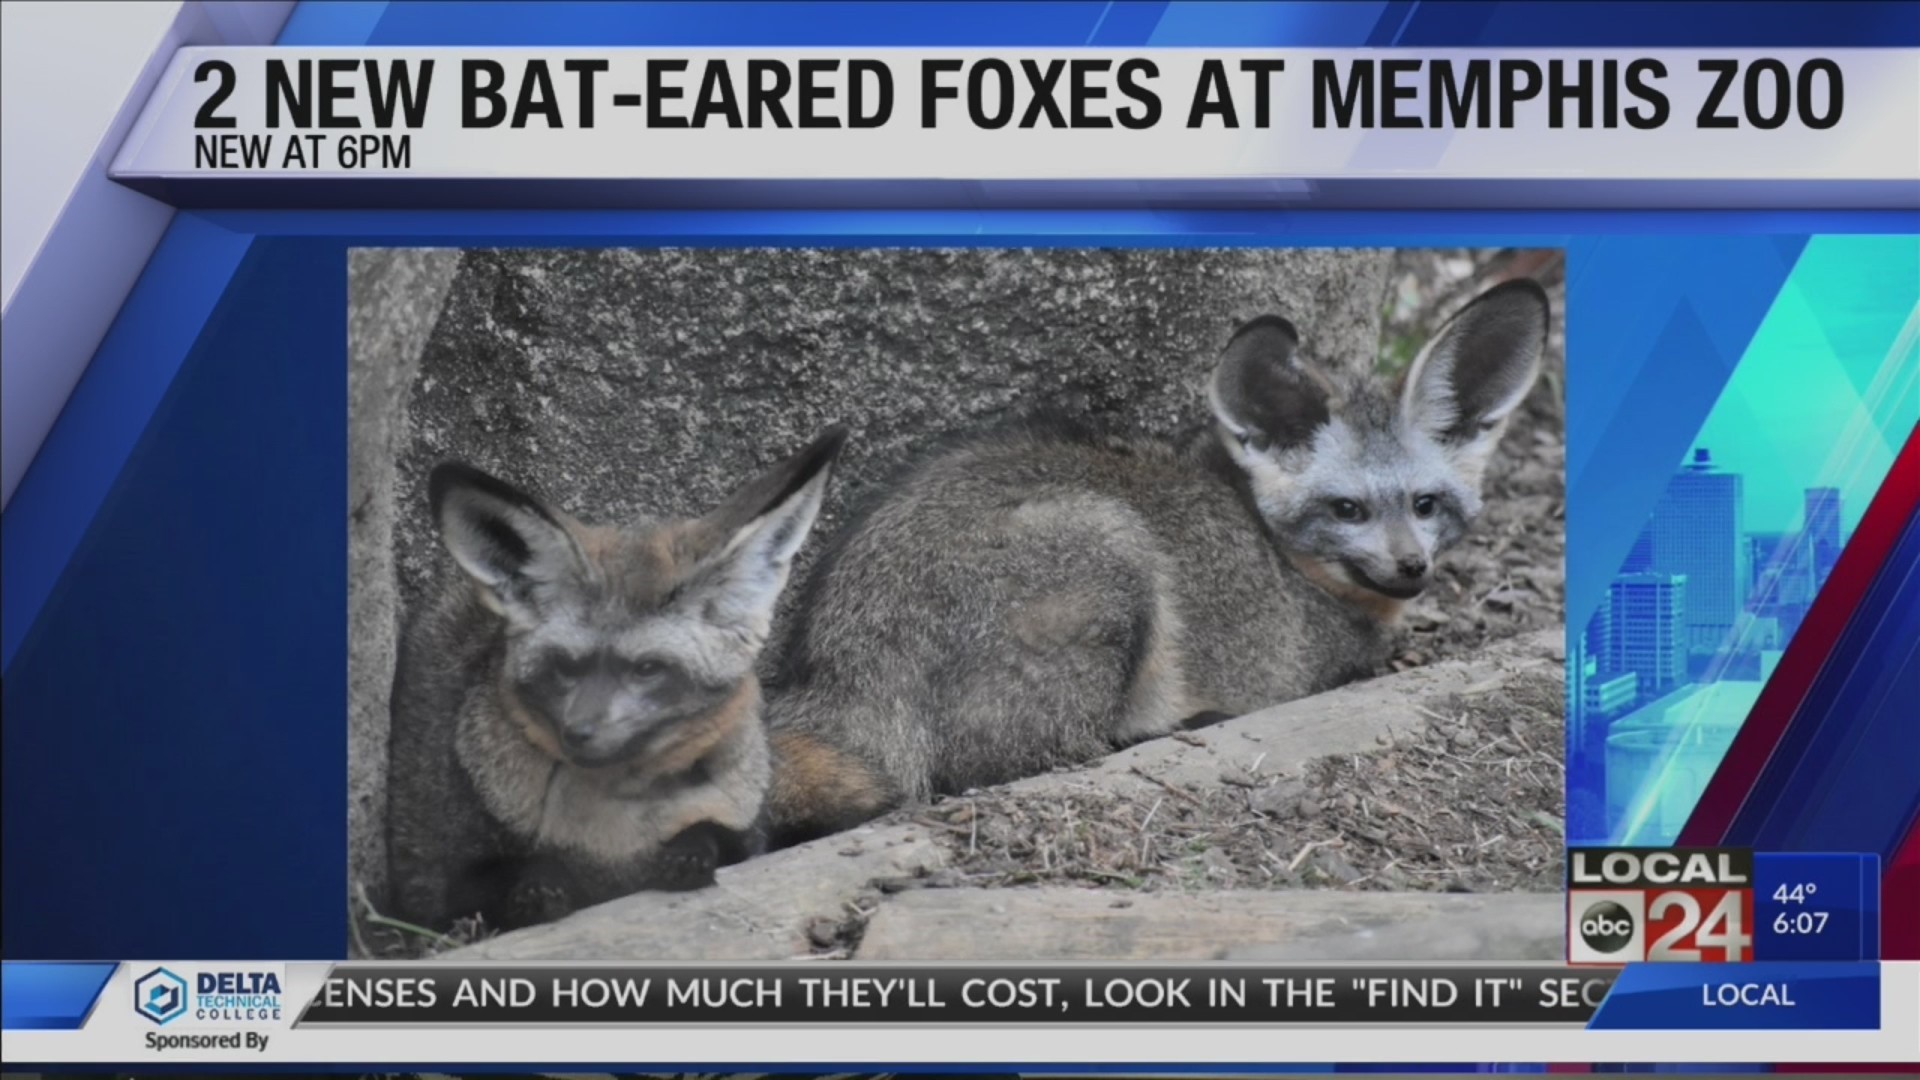 Memphis Zoo adds two Bat-Eared Foxes